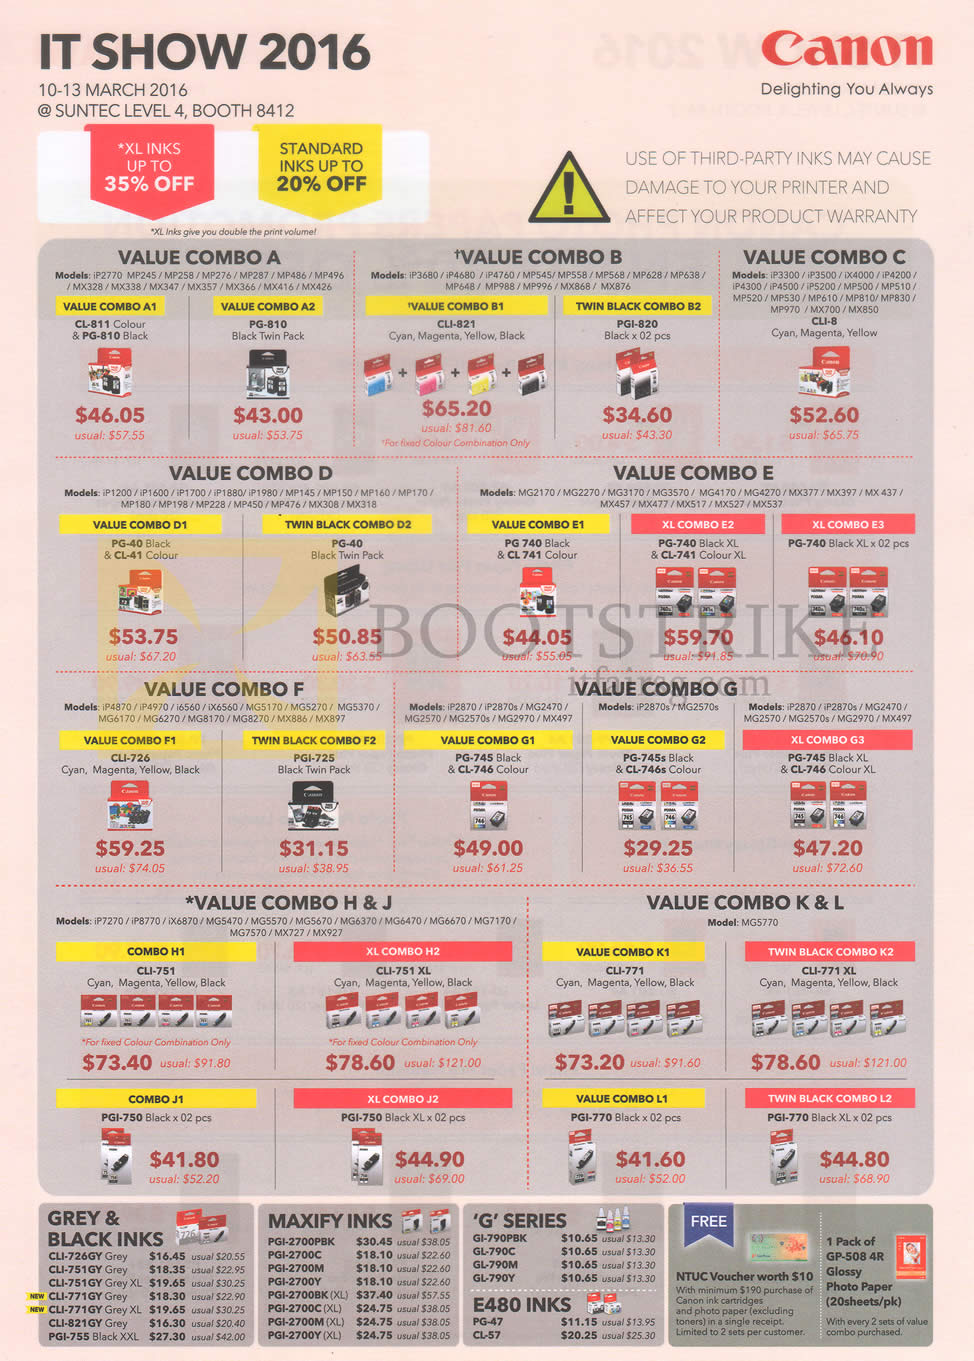 IT SHOW 2016 price list image brochure of Canon Toners Ink Cartridges Value Combos, Inks